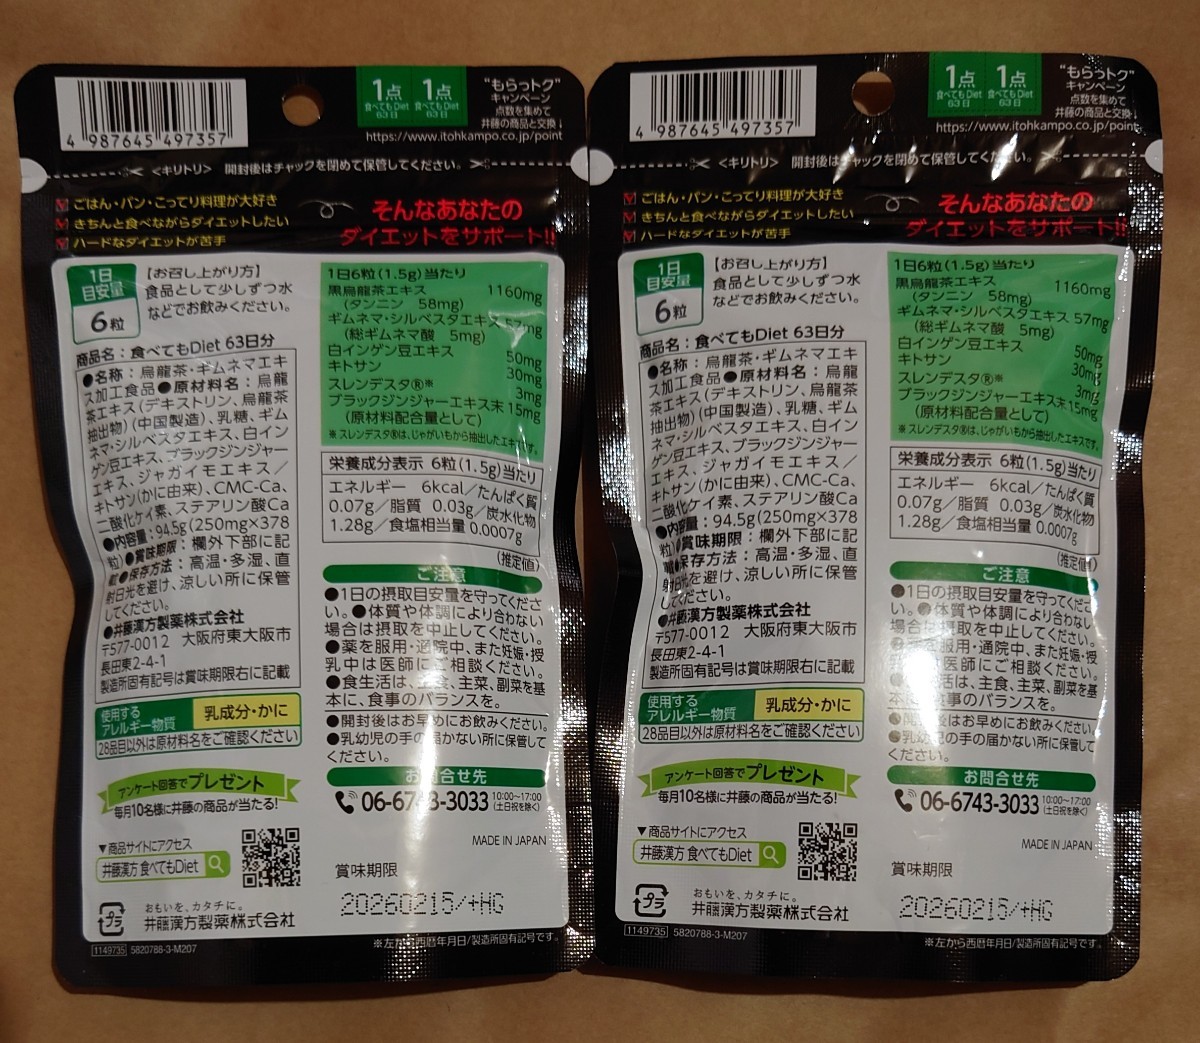  meal ... diet 63 day minute (378 bead )x 2 sack [. wistaria traditional Chinese medicine ]